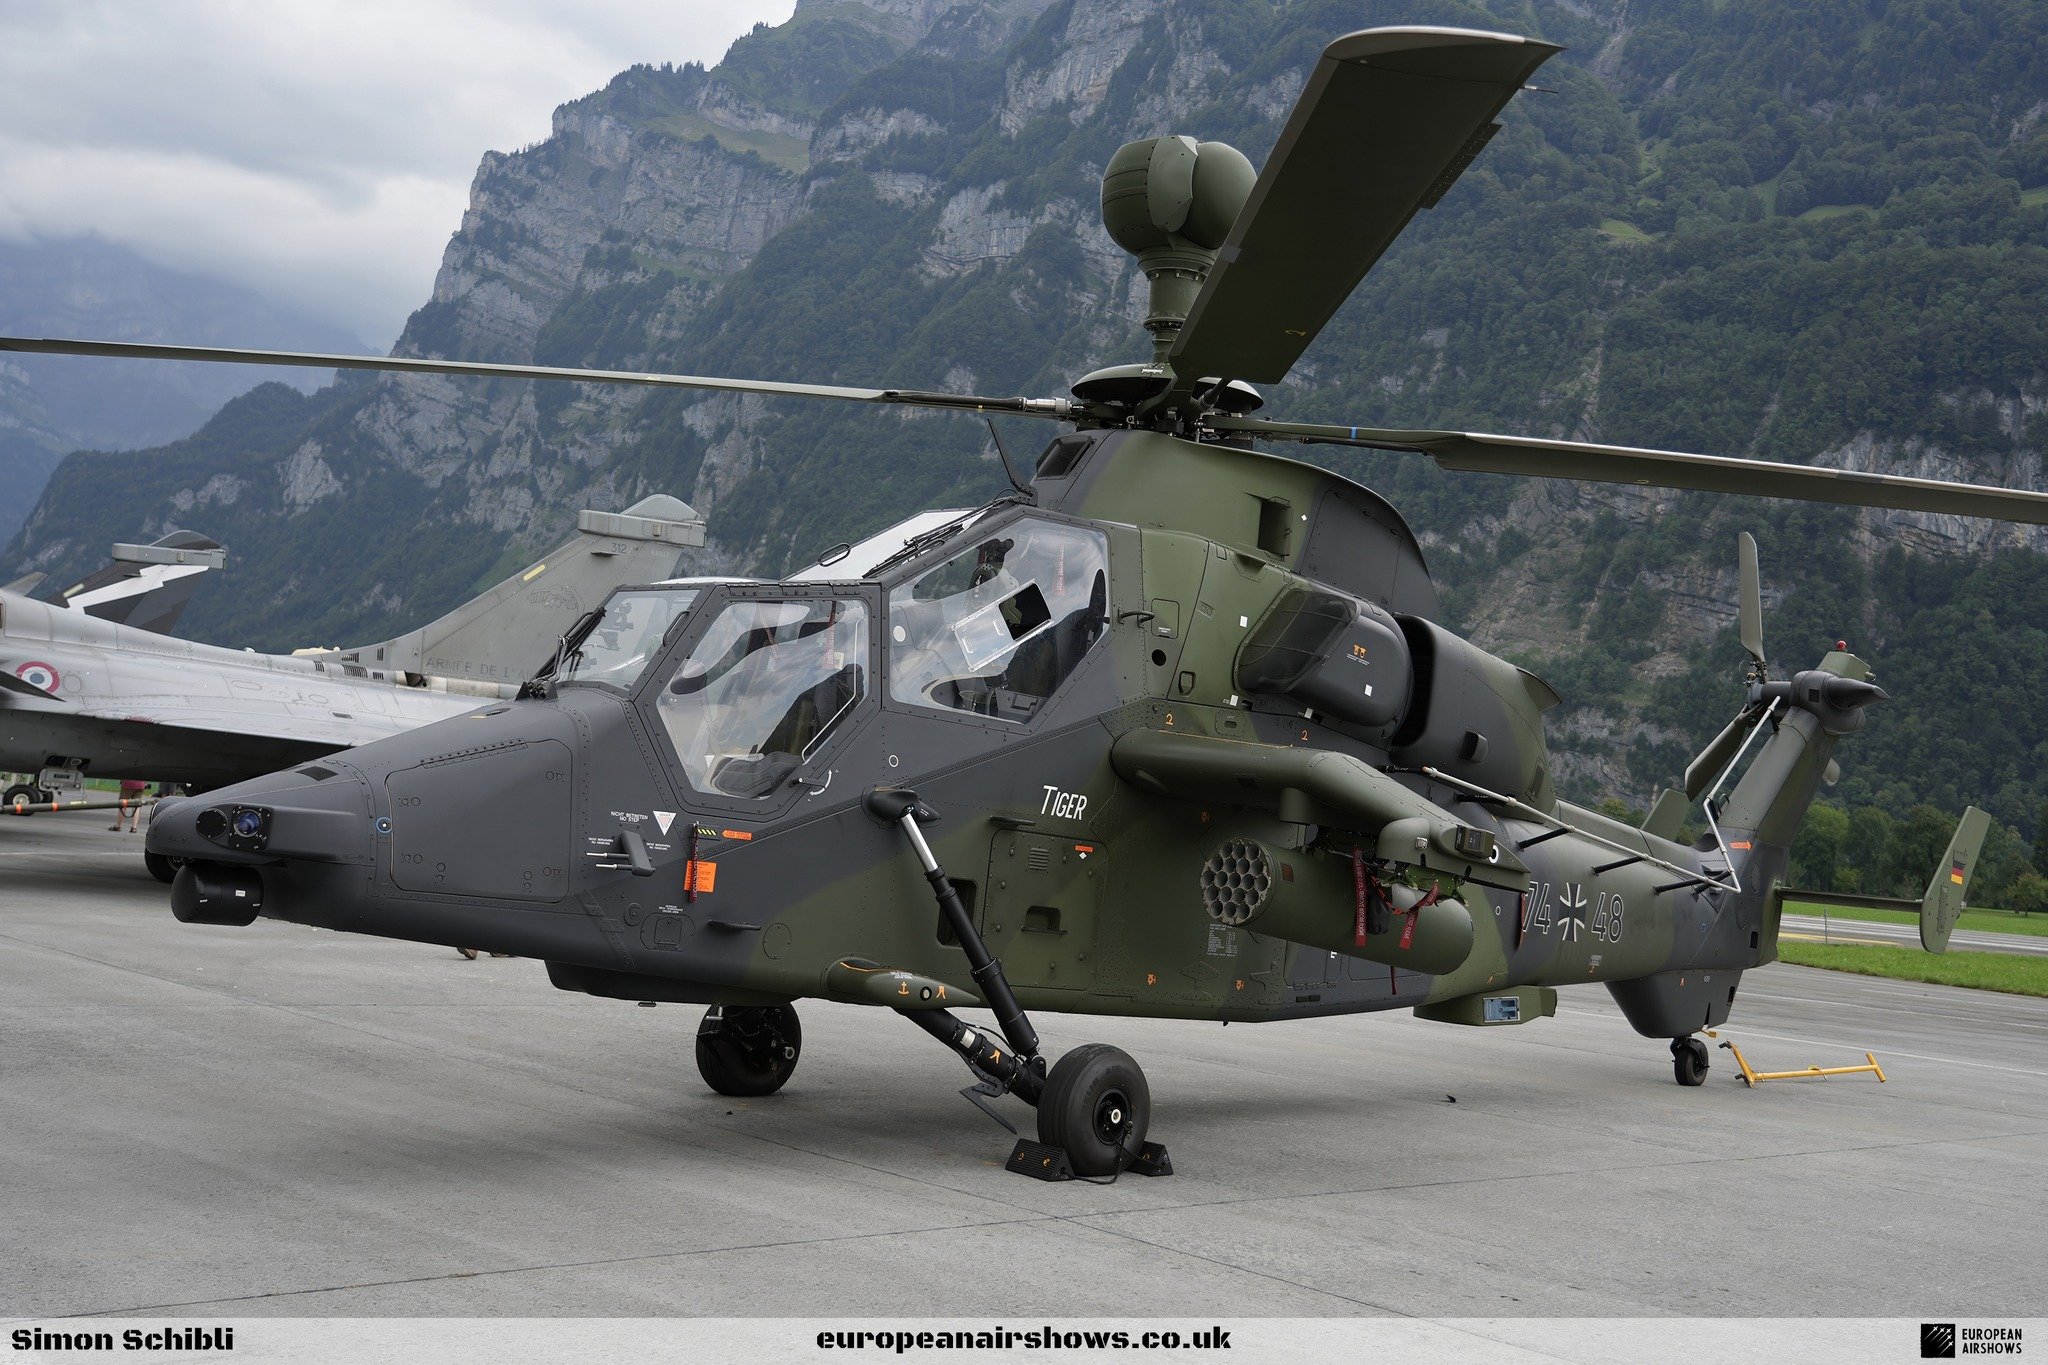 #OTD Apr. 27, 1991 - Eurocopter Tiger performed its first flight. 

The Tiger is a multi-role attack helicopter designed for complex collaborative environments and high-intensity conflicts. It is the first all-composite helicopter developed in Europe